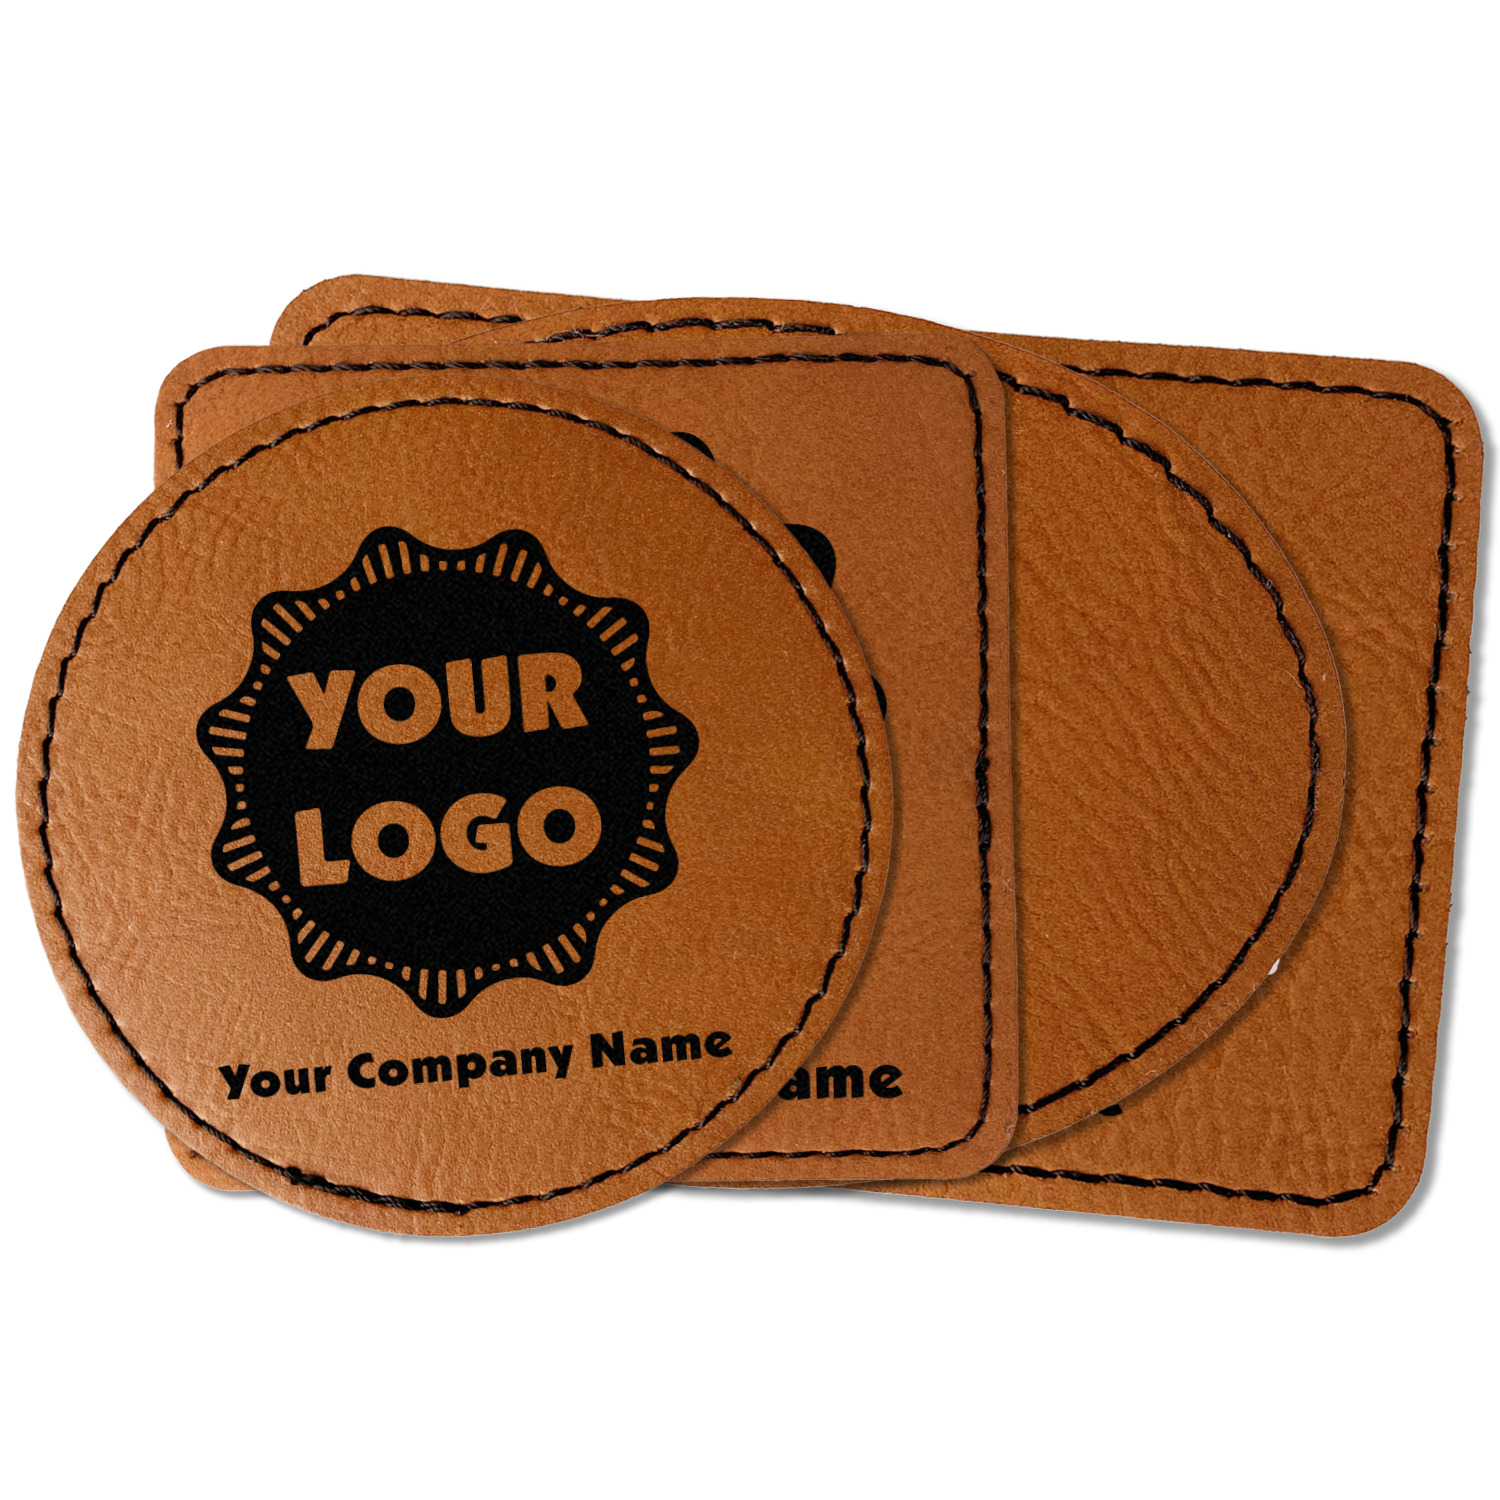 Laser Etched Leather Patches. This article was originally posted